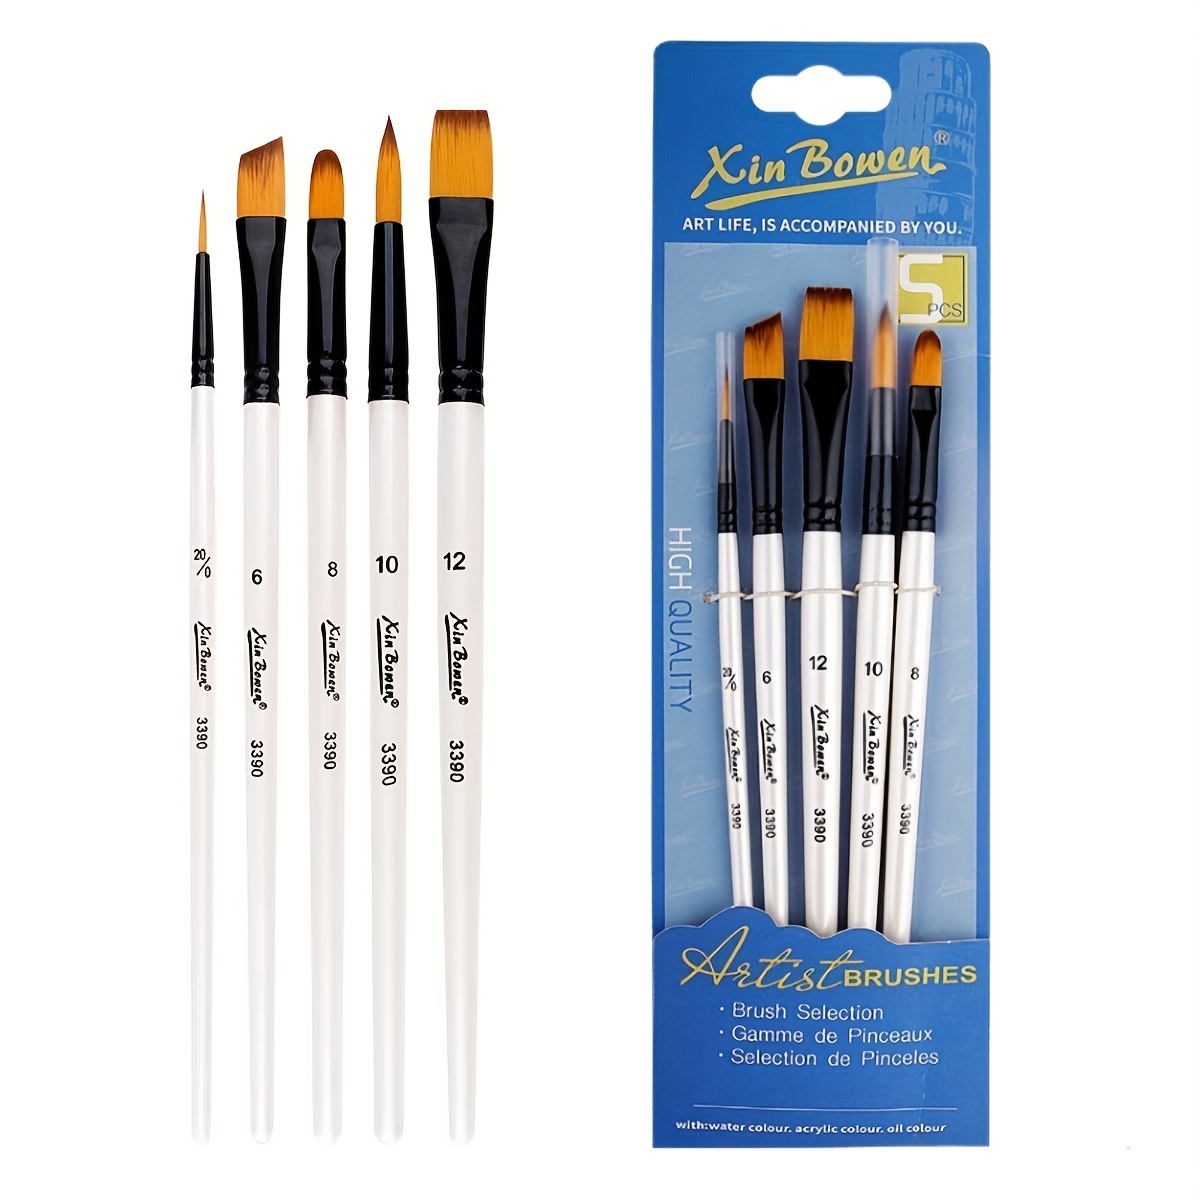 

5-piece Artist Paint Brush Set For Acrylic, Watercolor & Gouache - Versatile Body And Face Painting Brushes For Adults And Kids